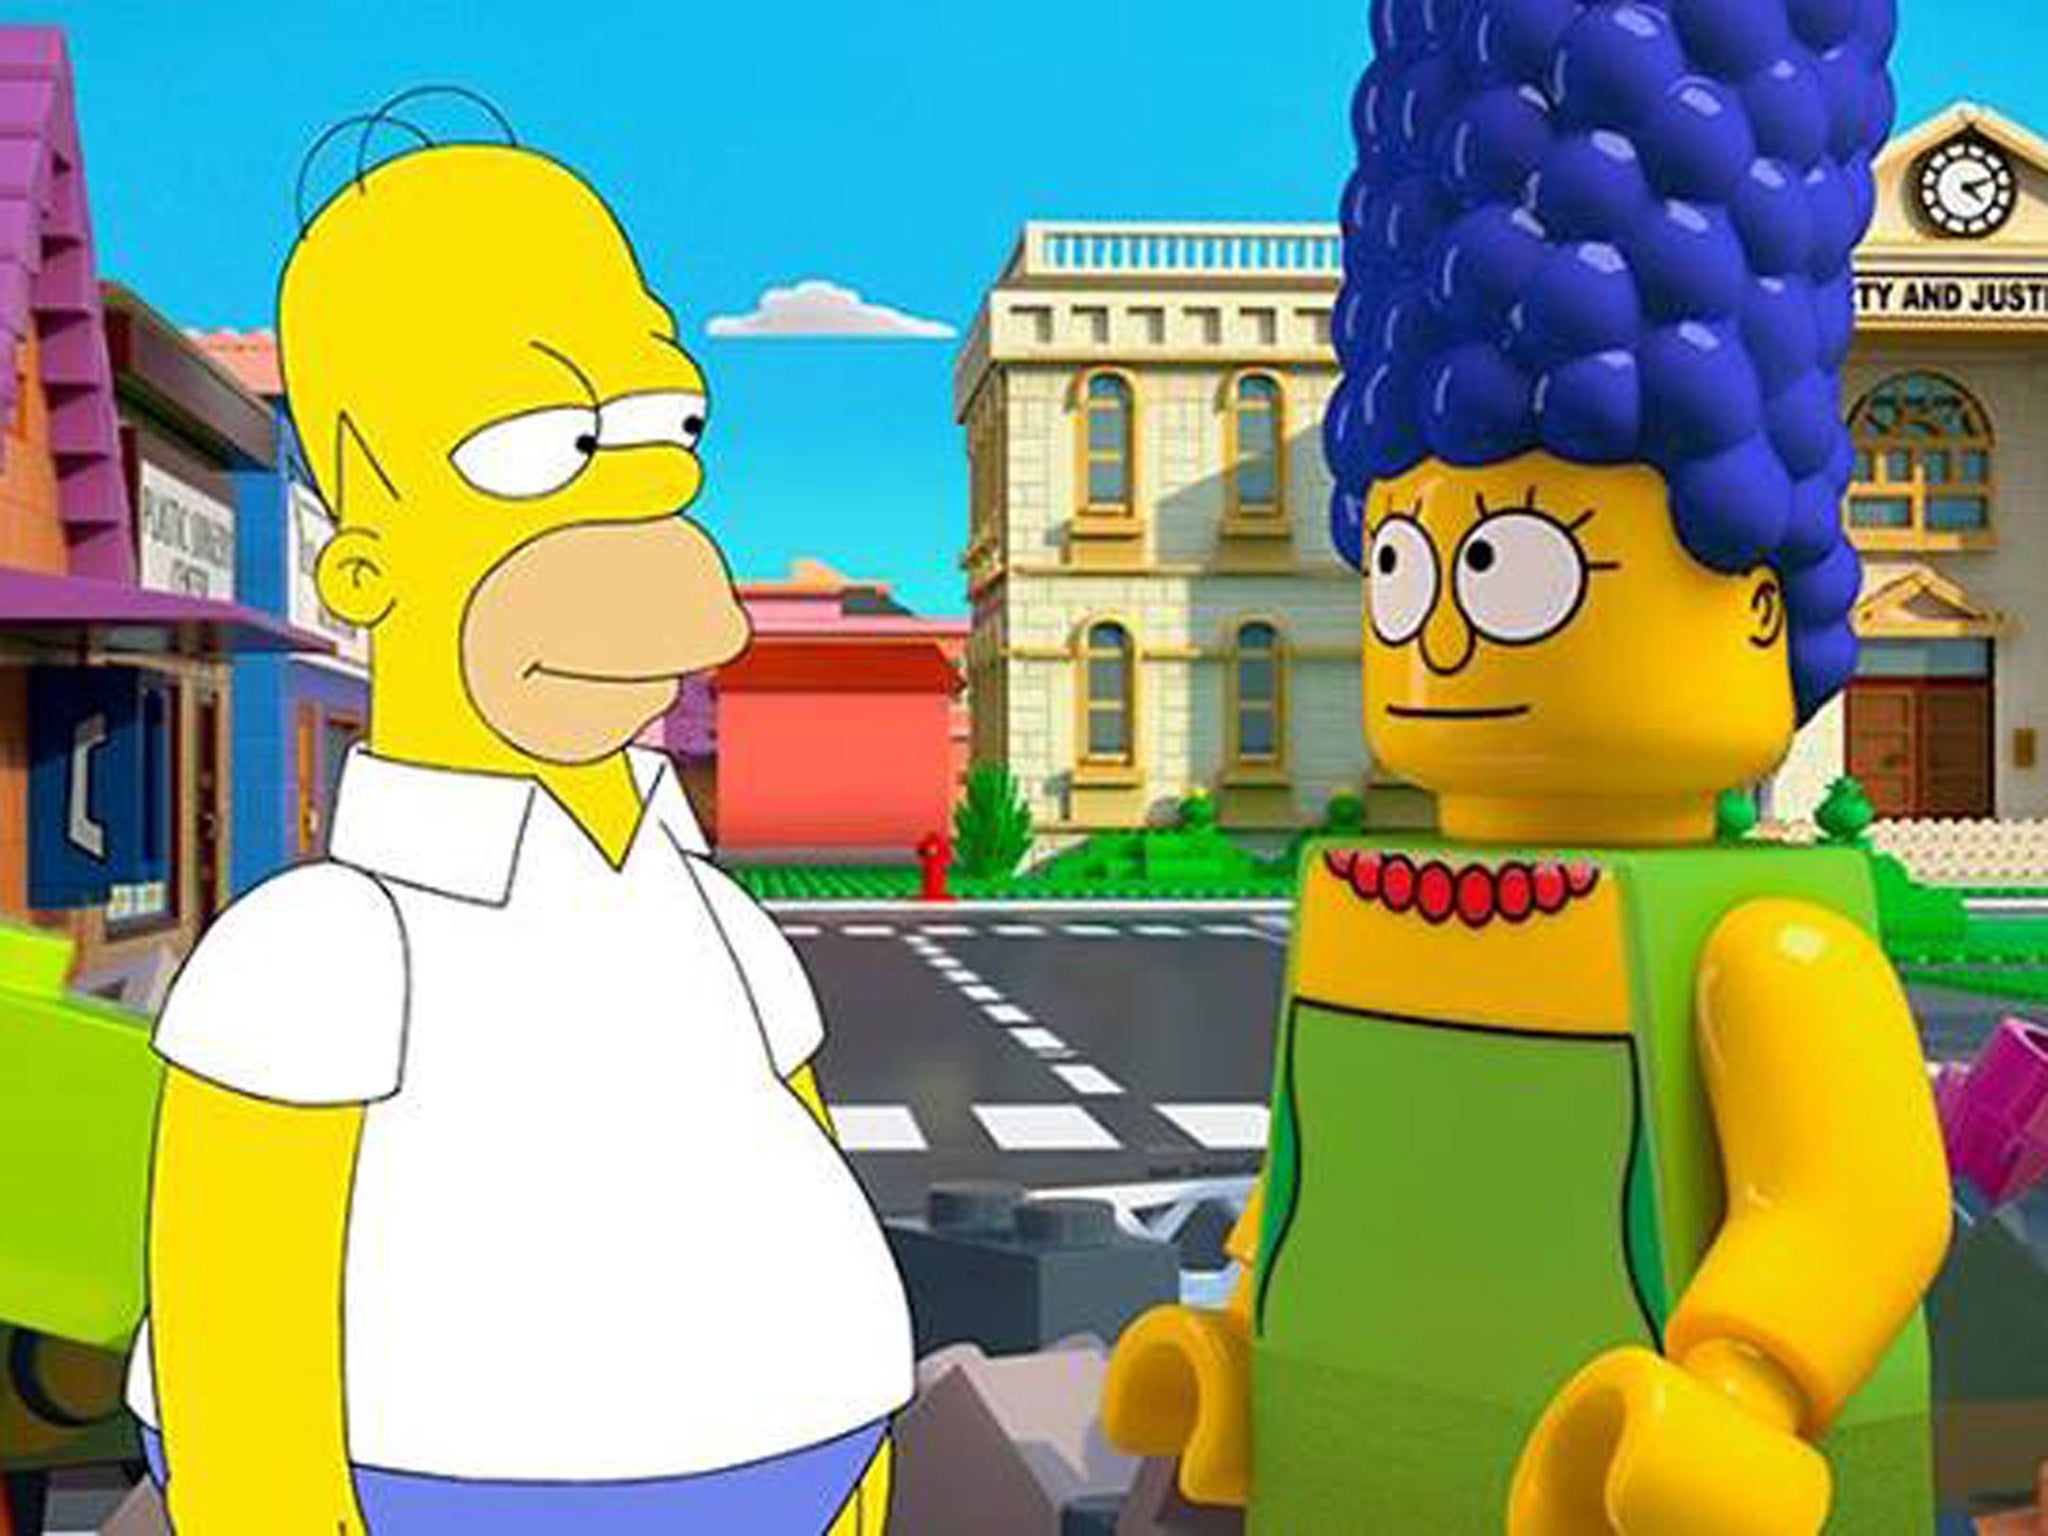 Homer meets Lego Marge in the 25th anniversary episode of The Simpsons, set to air on 4 May